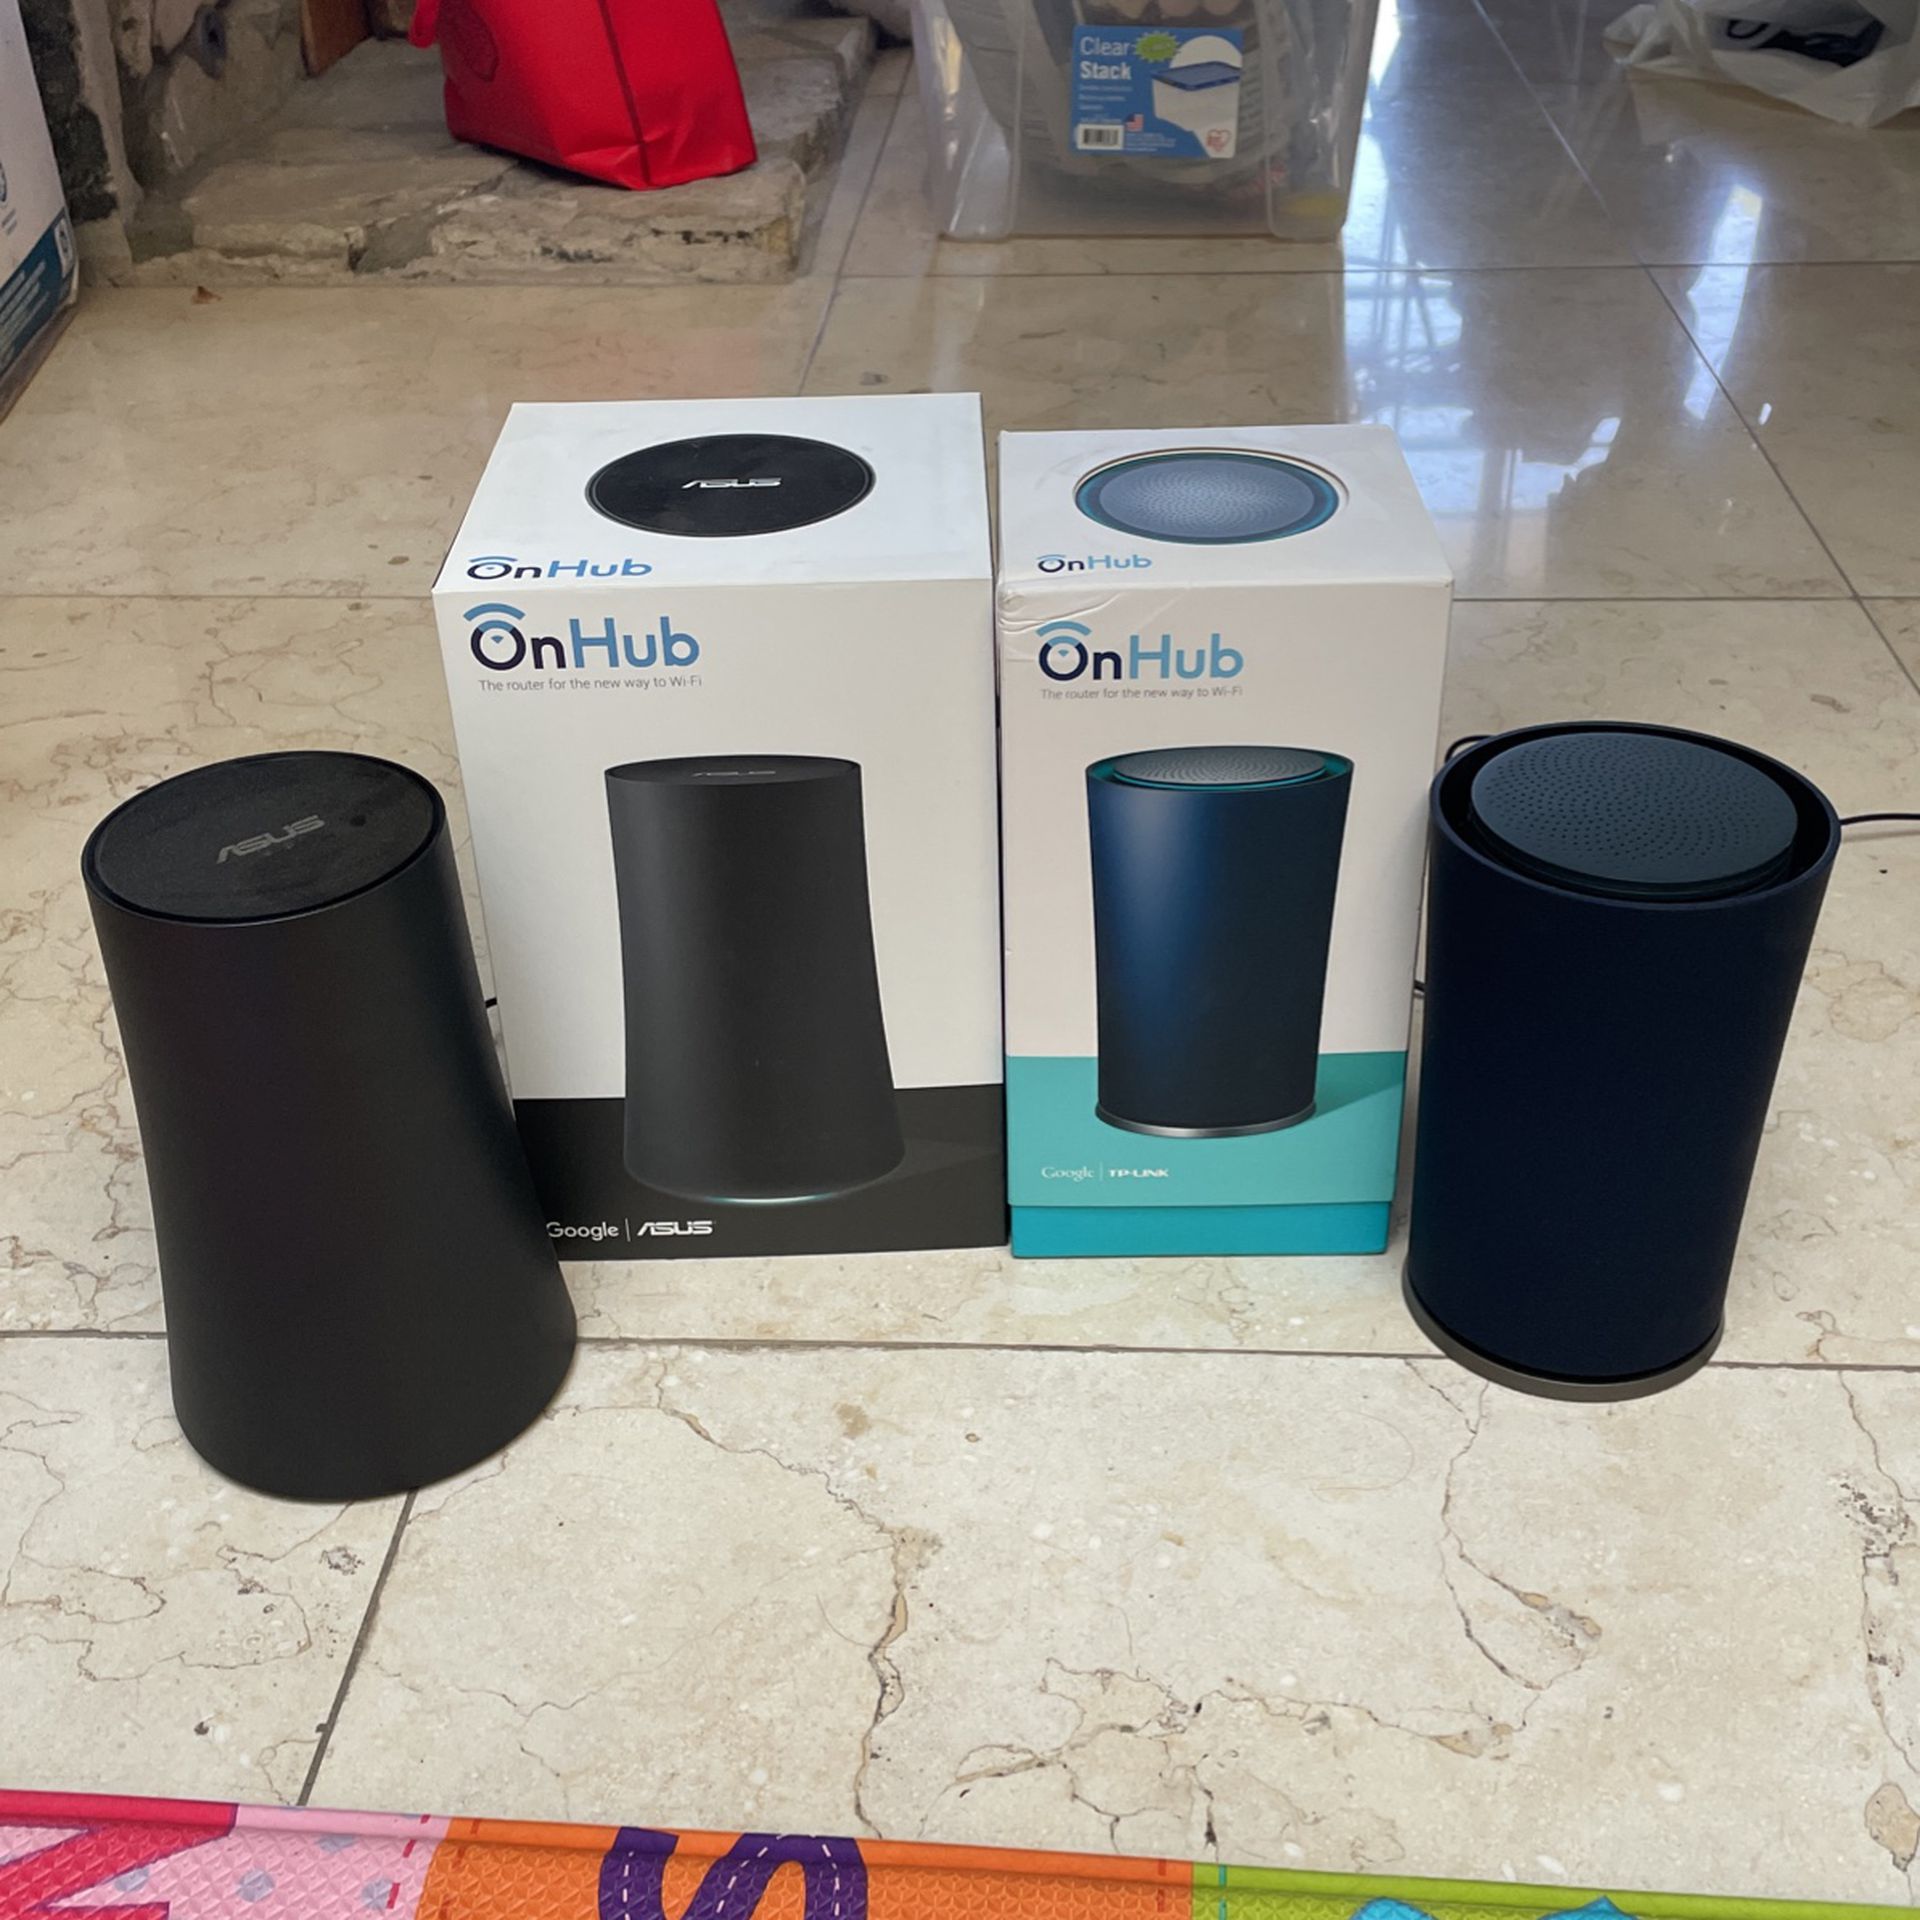 Tp-Link Onhub & Asus Onhub Routers  (2 Routers Included)